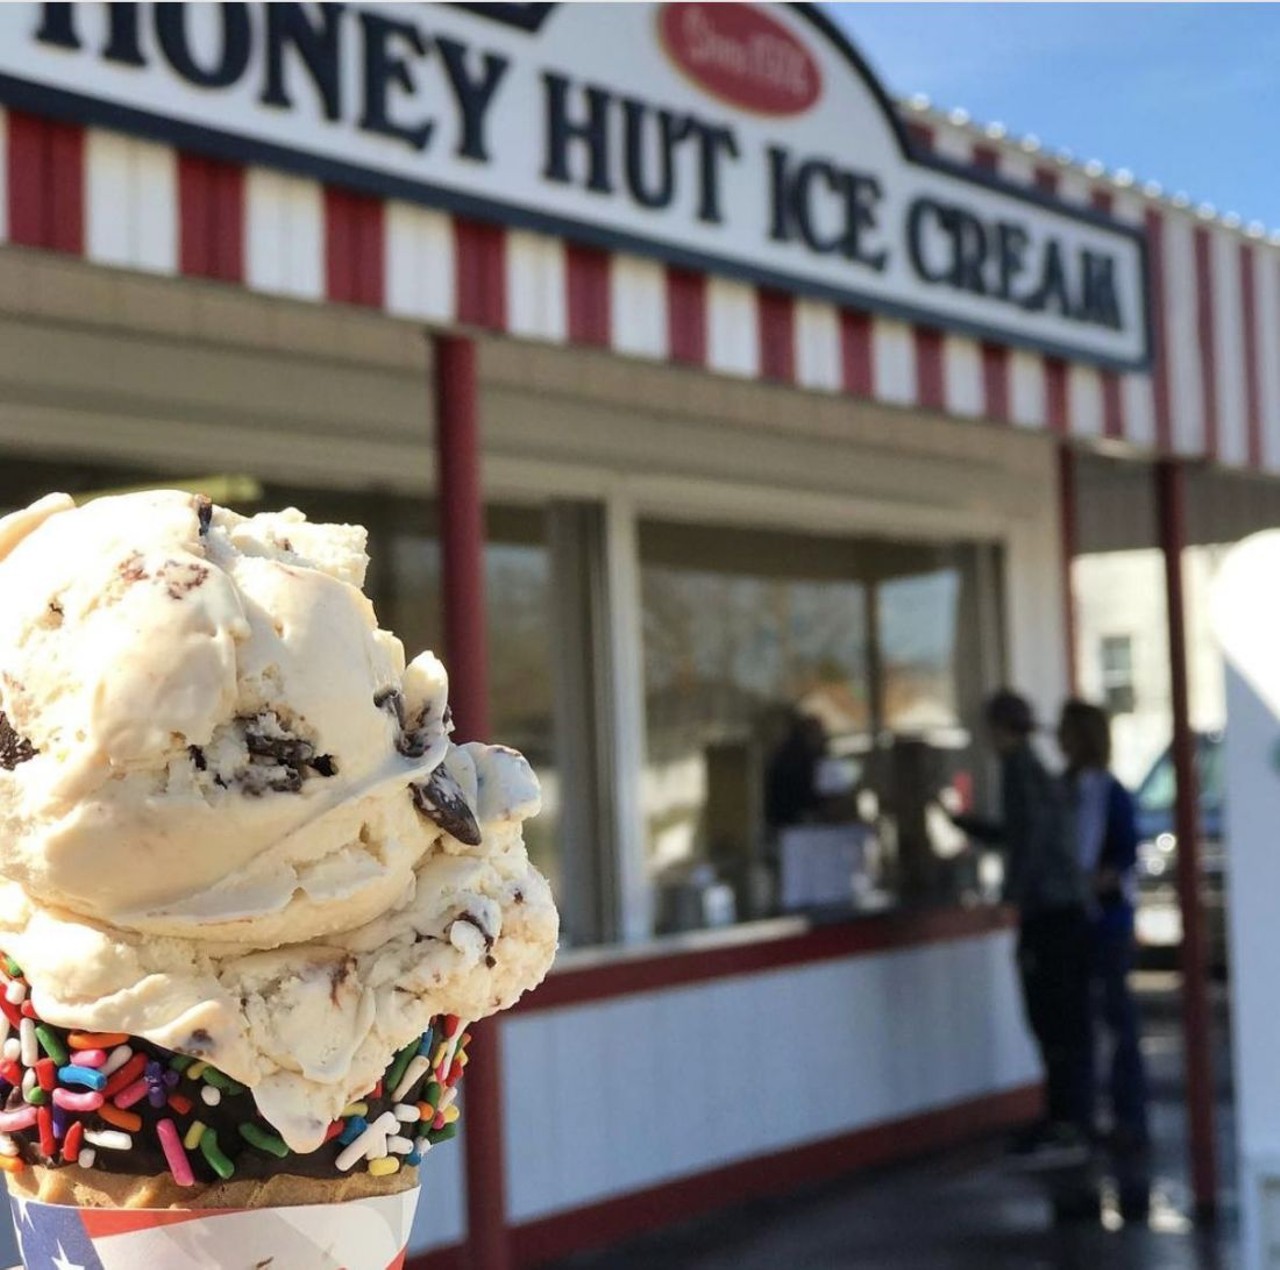  Honey Hut
Multiple Locations
Frank and Marianne Page started Honey Hut in 1973. Today, their grandson Jonathan Rosati owns and operates their five locations and serves up delicious ice cream to Clevelanders all over town.
Photo via @Honey_Hut/Instagram